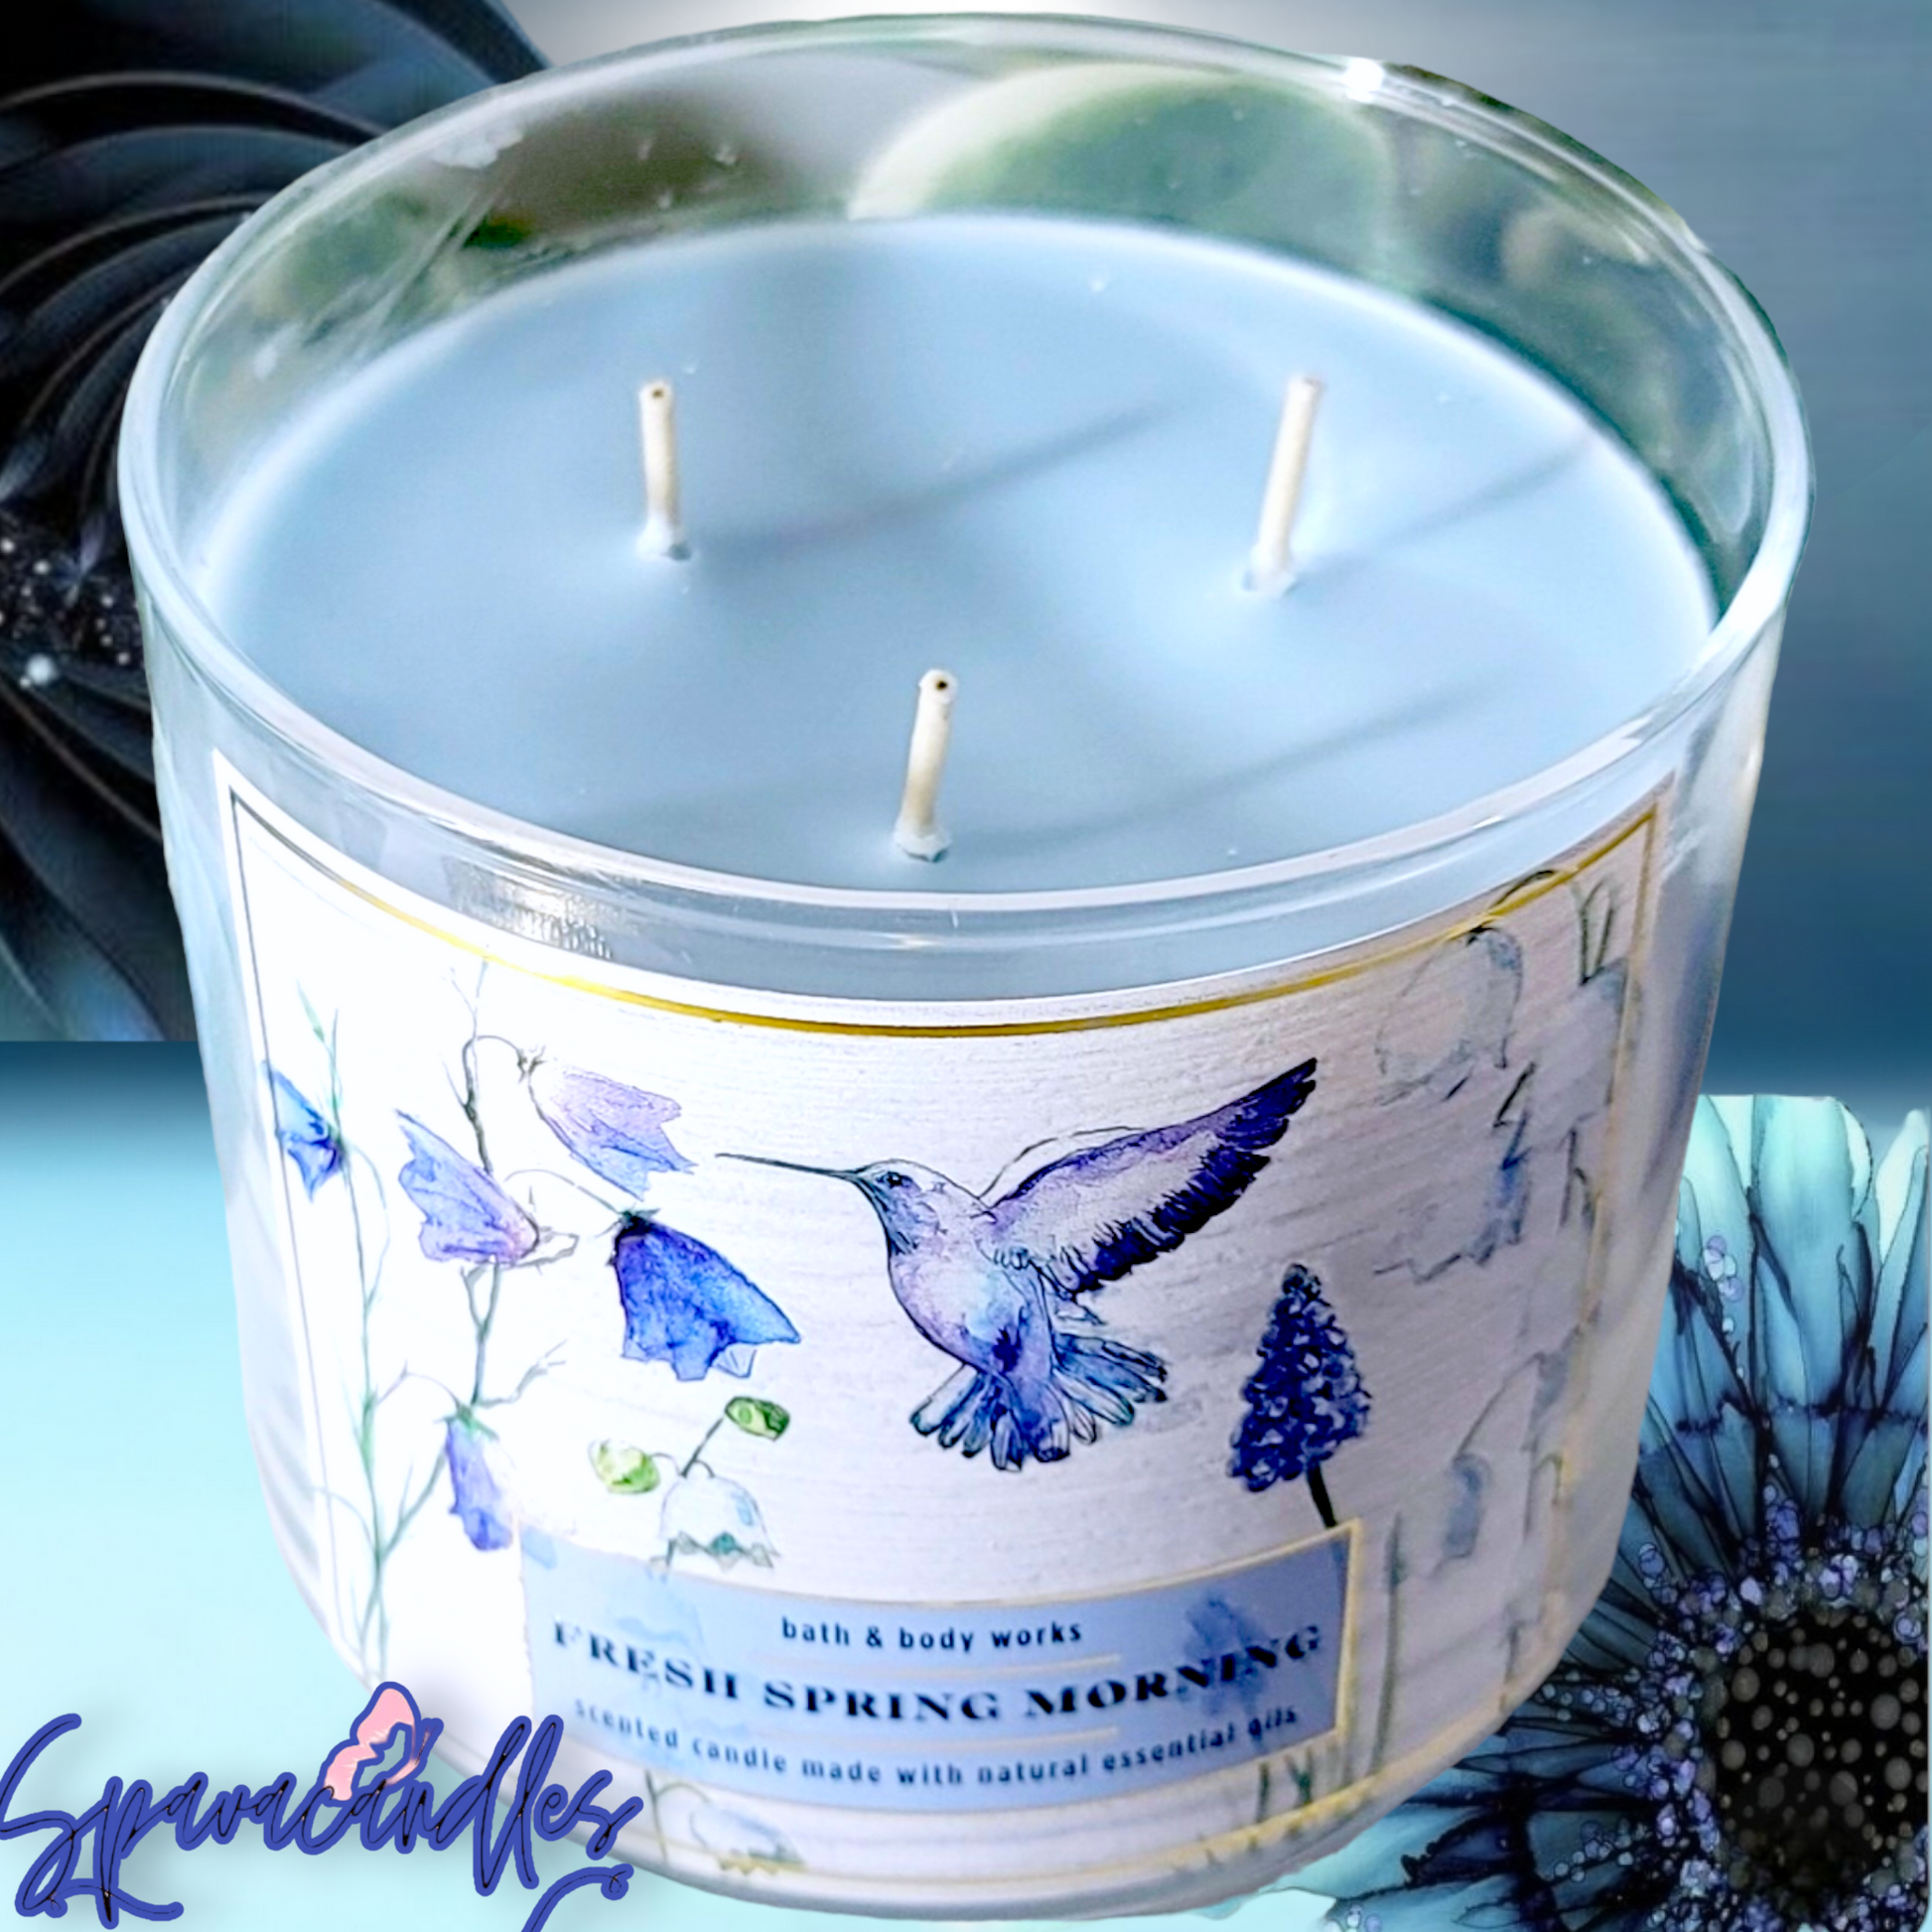 Bath & Body Works Blueberry Lavender Spritzer 3 Wick Candle Summer Ear –  Spavacandles